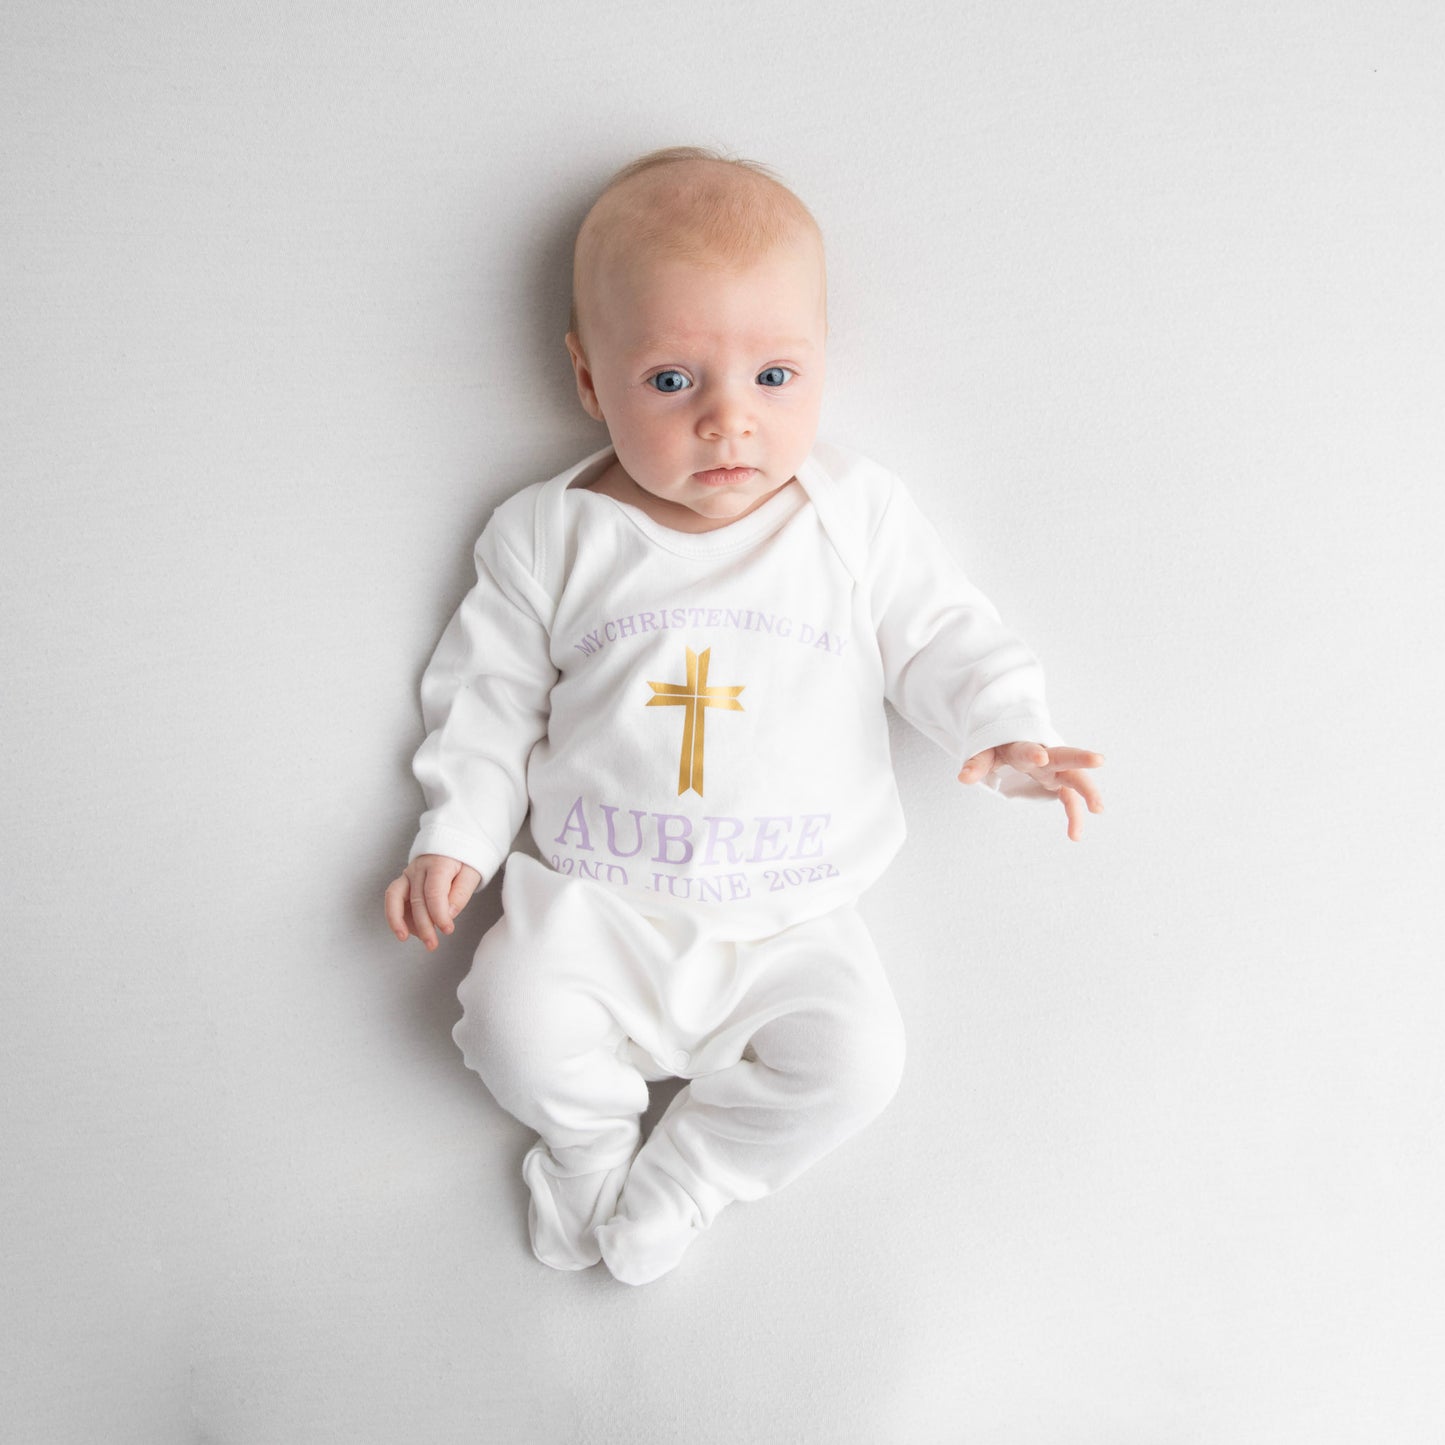 My Christening Day Cross Rompersuit